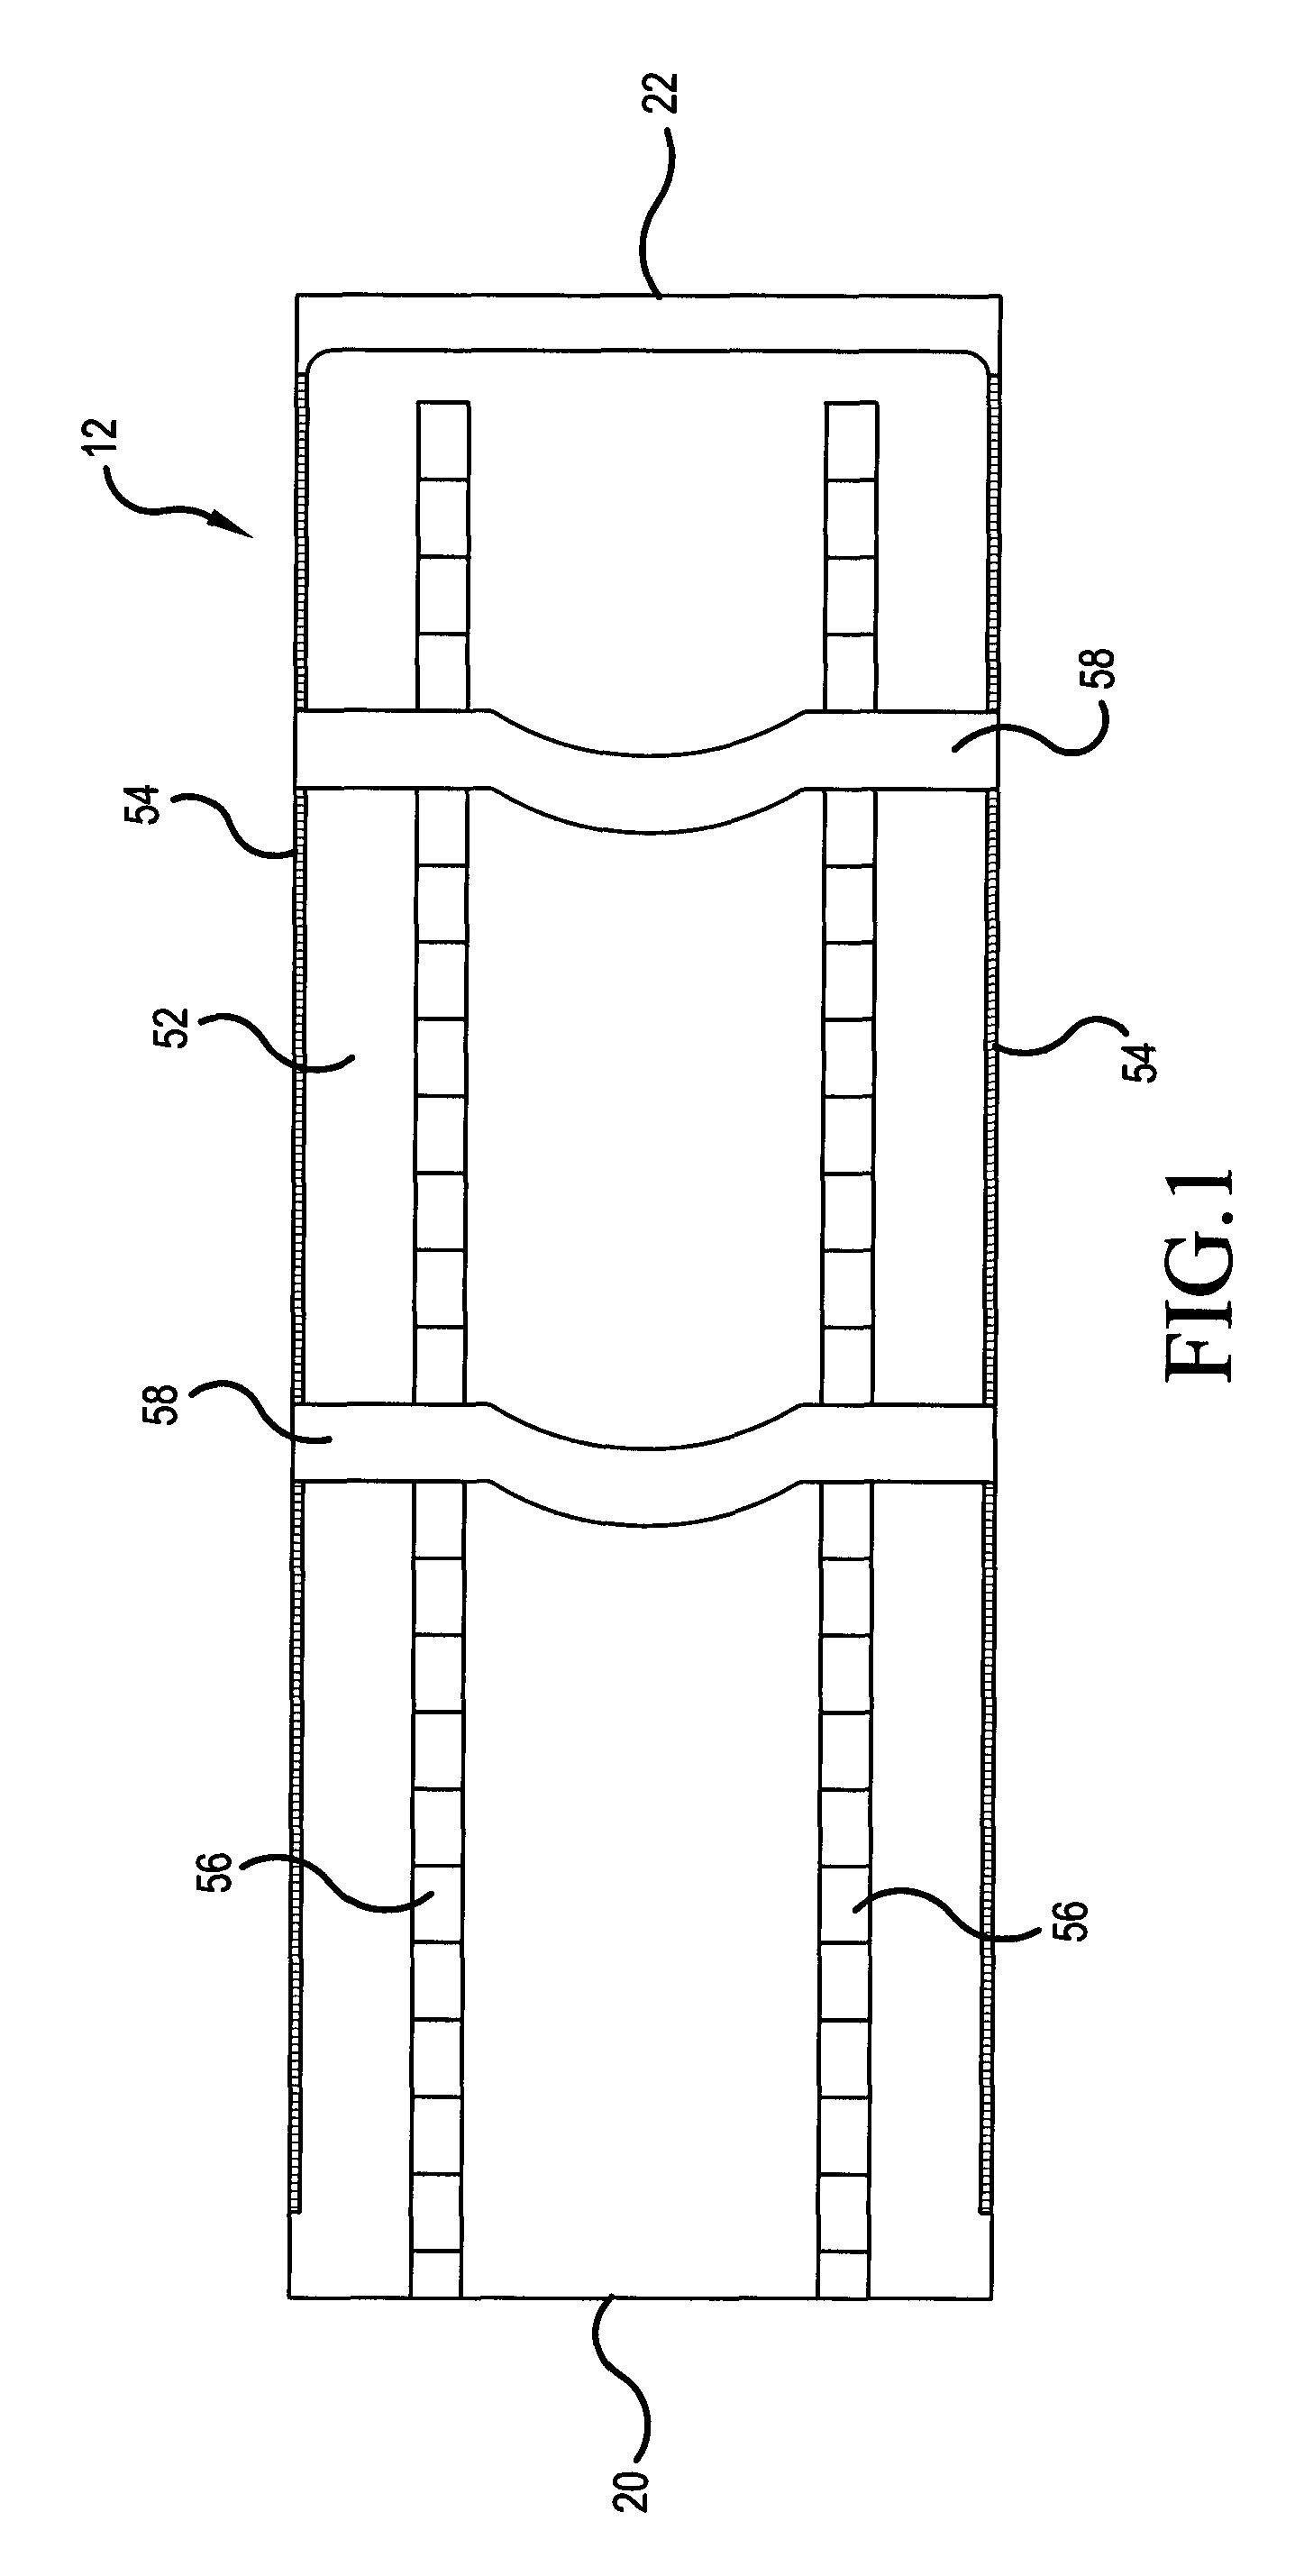 Accessory bag having reinforced sidewalls and variable length